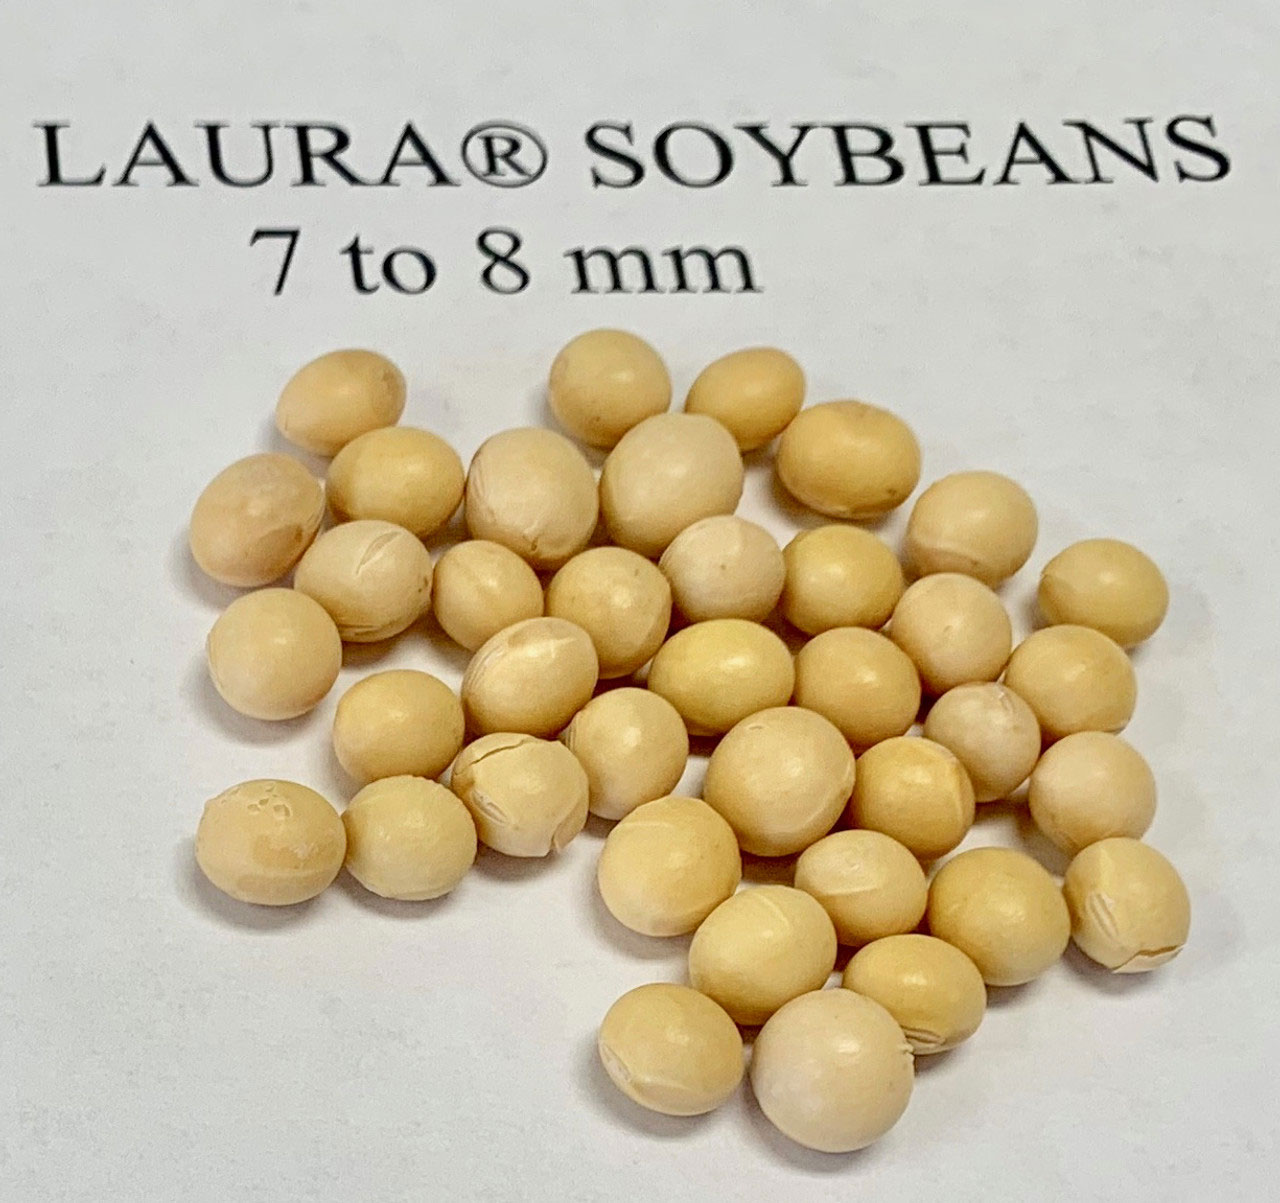 A close up of Laura Soybeans with the label "7 to 8 mm".